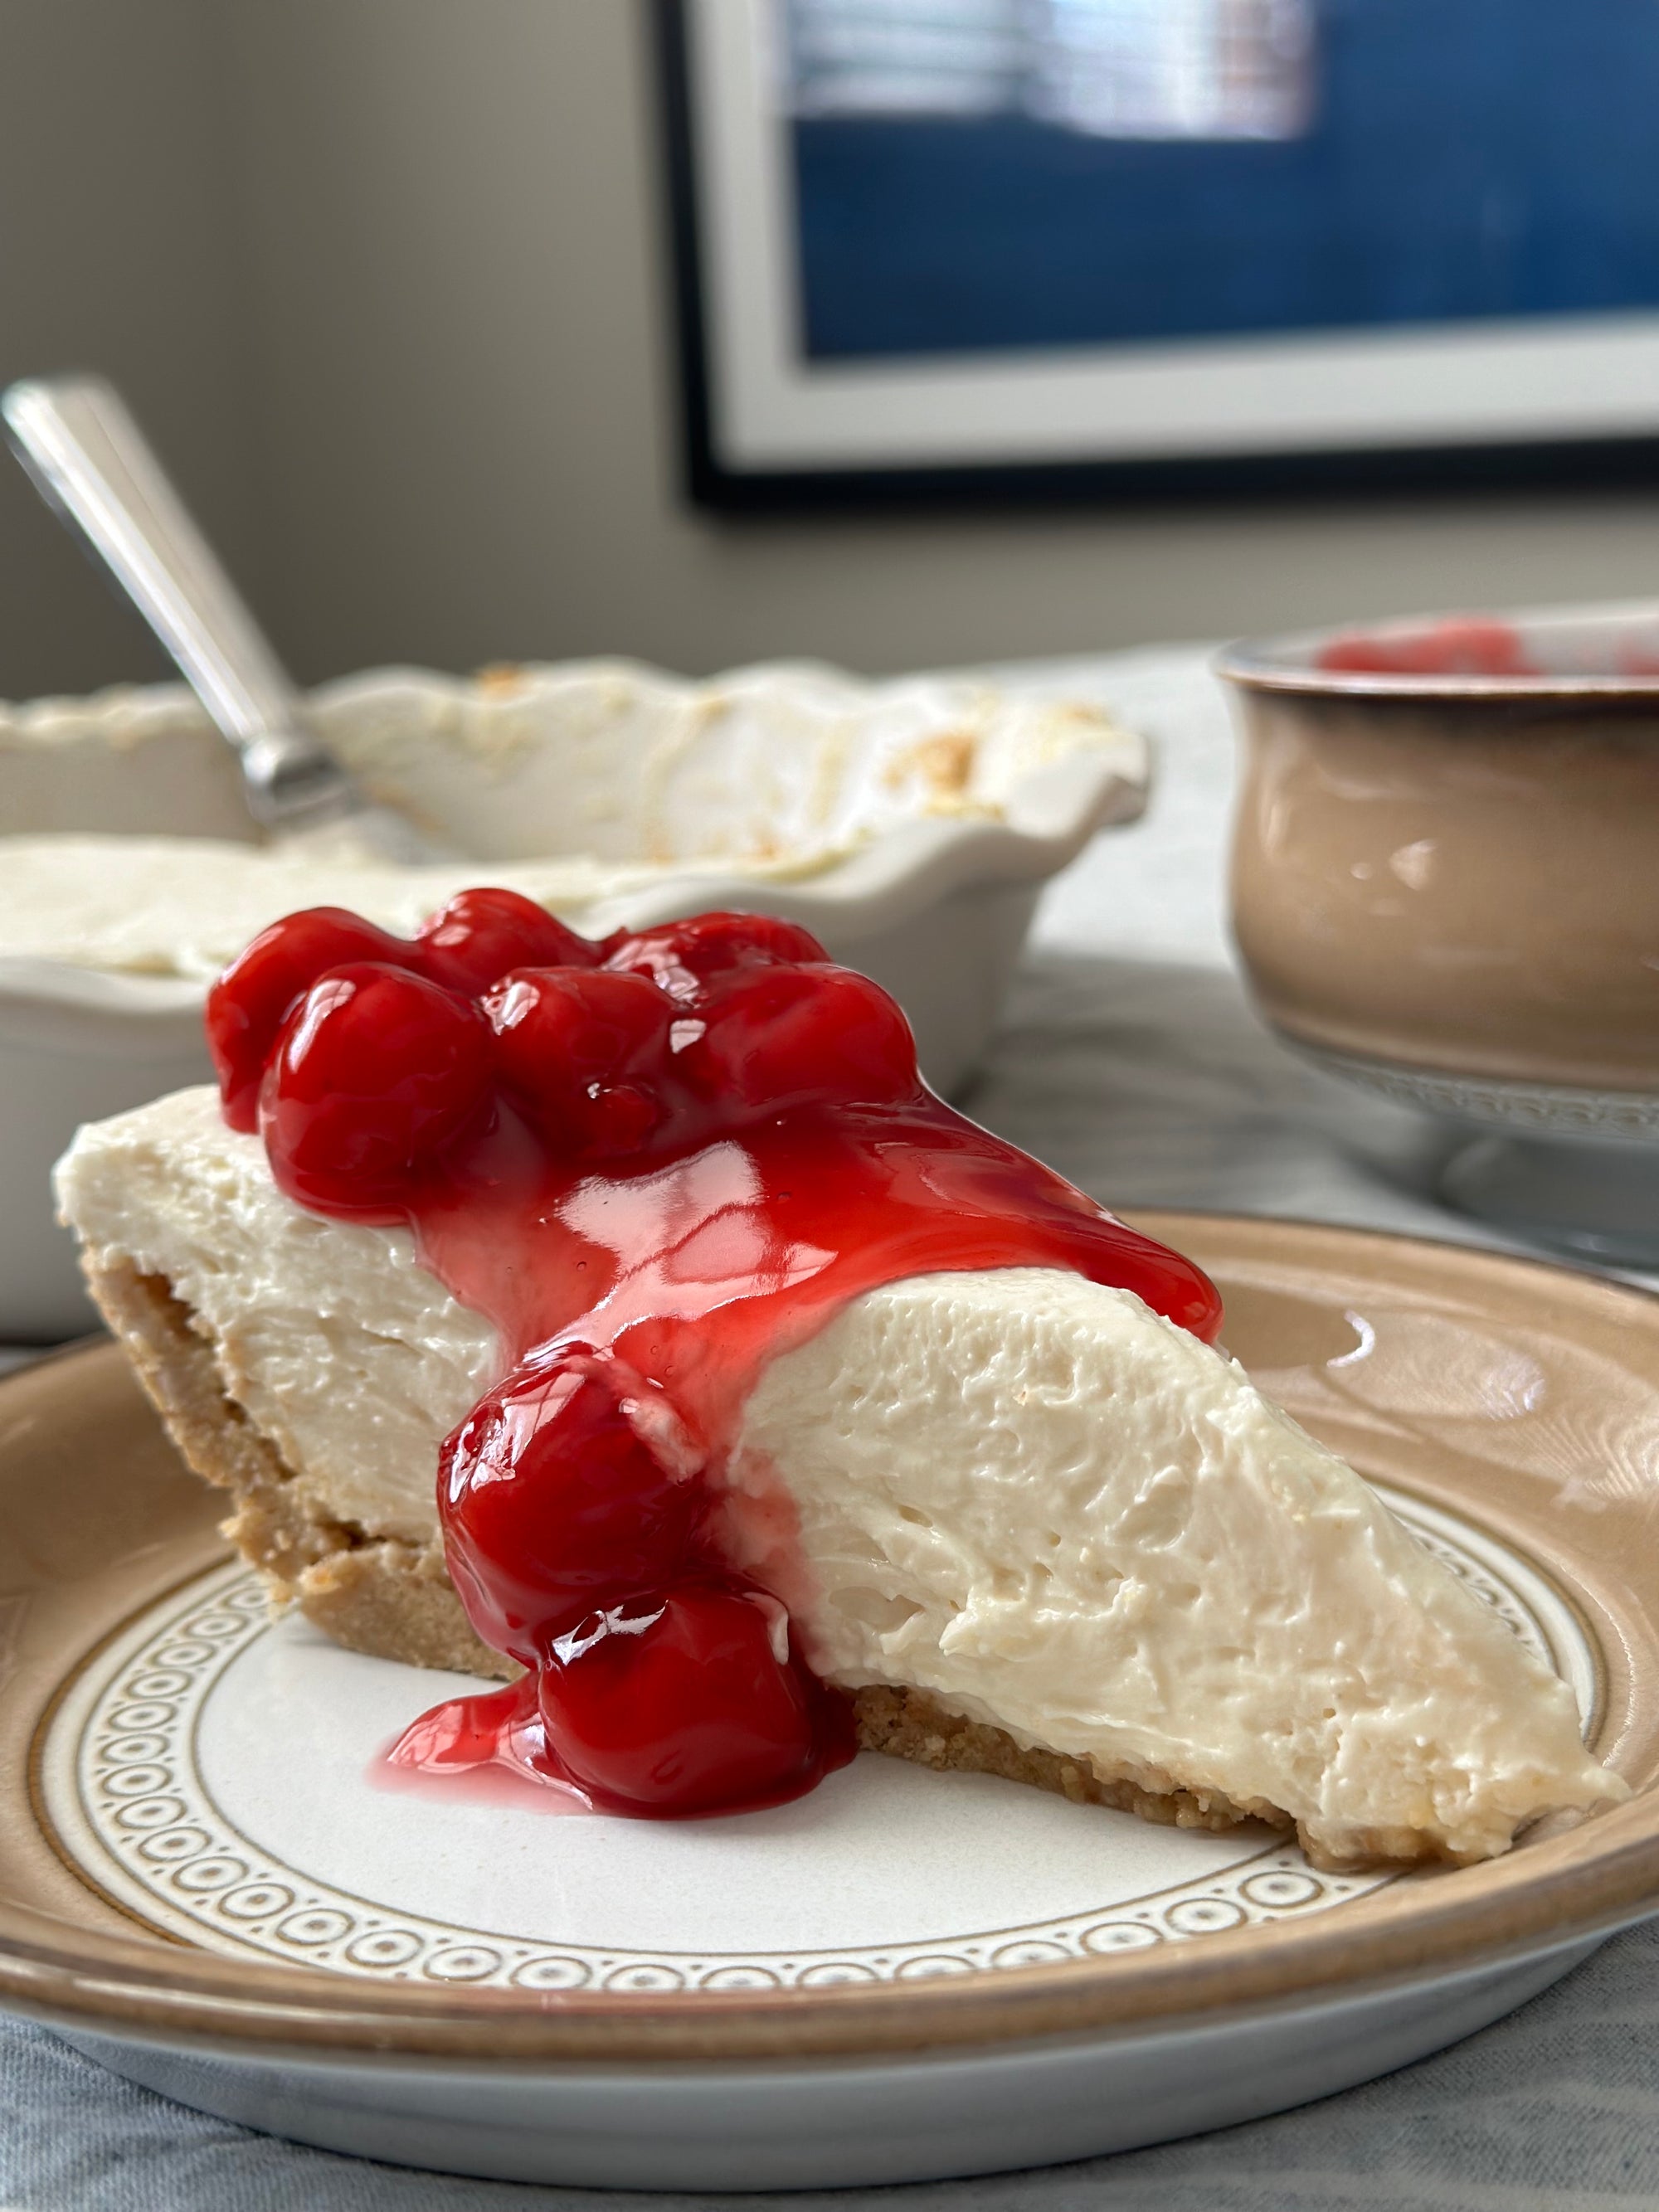 No Oven, No Problem: Conquer Cheesecake Cravings with this No-Bake Recipe!